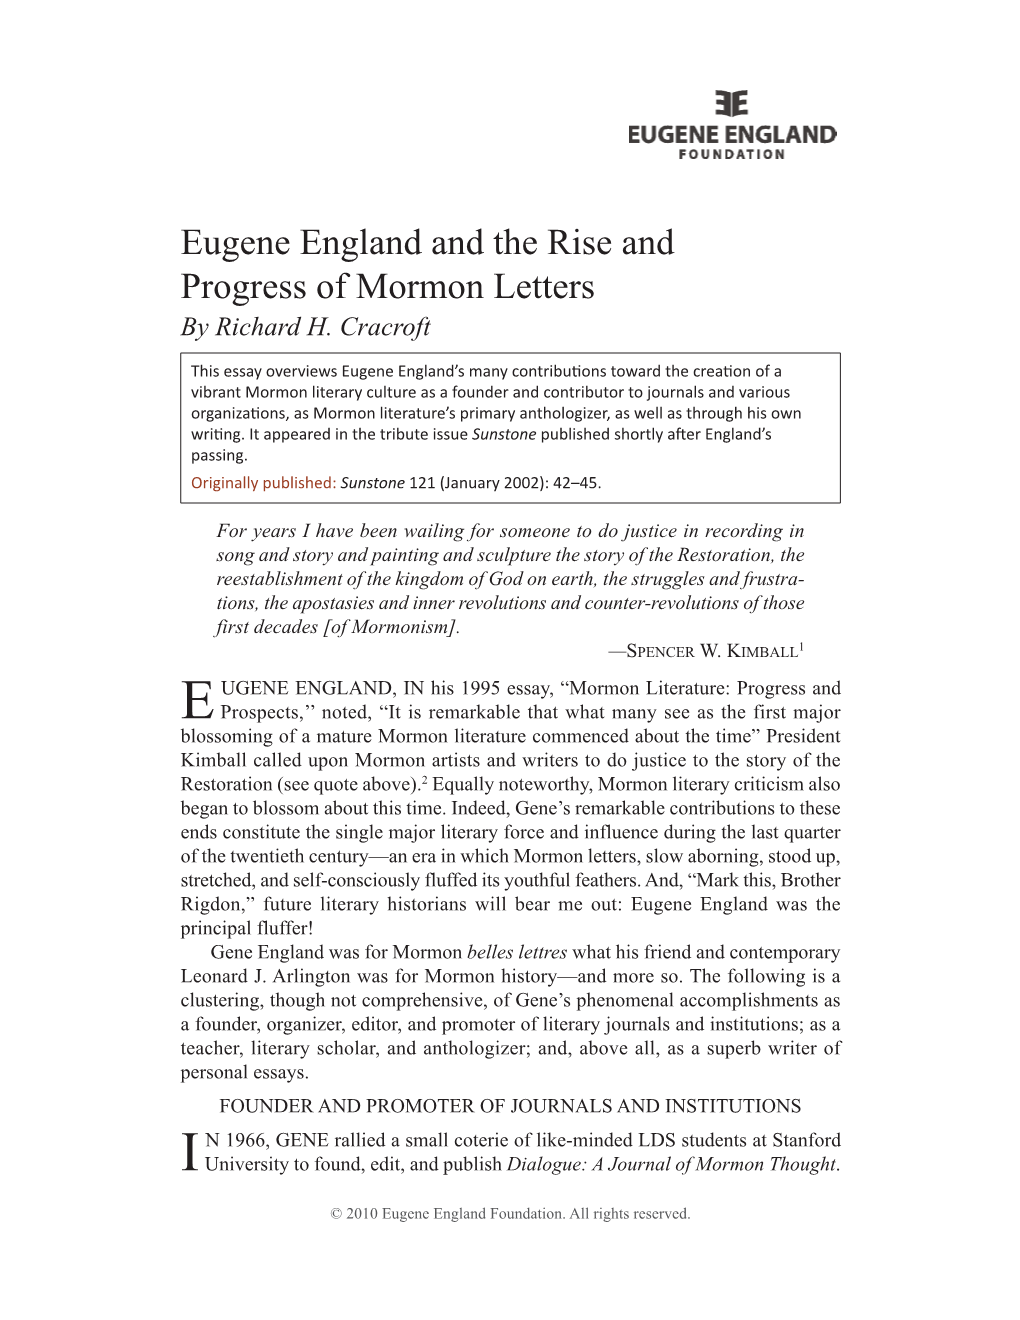 Eugene England and the Rise and Progress of Mormon Letters by Richard H